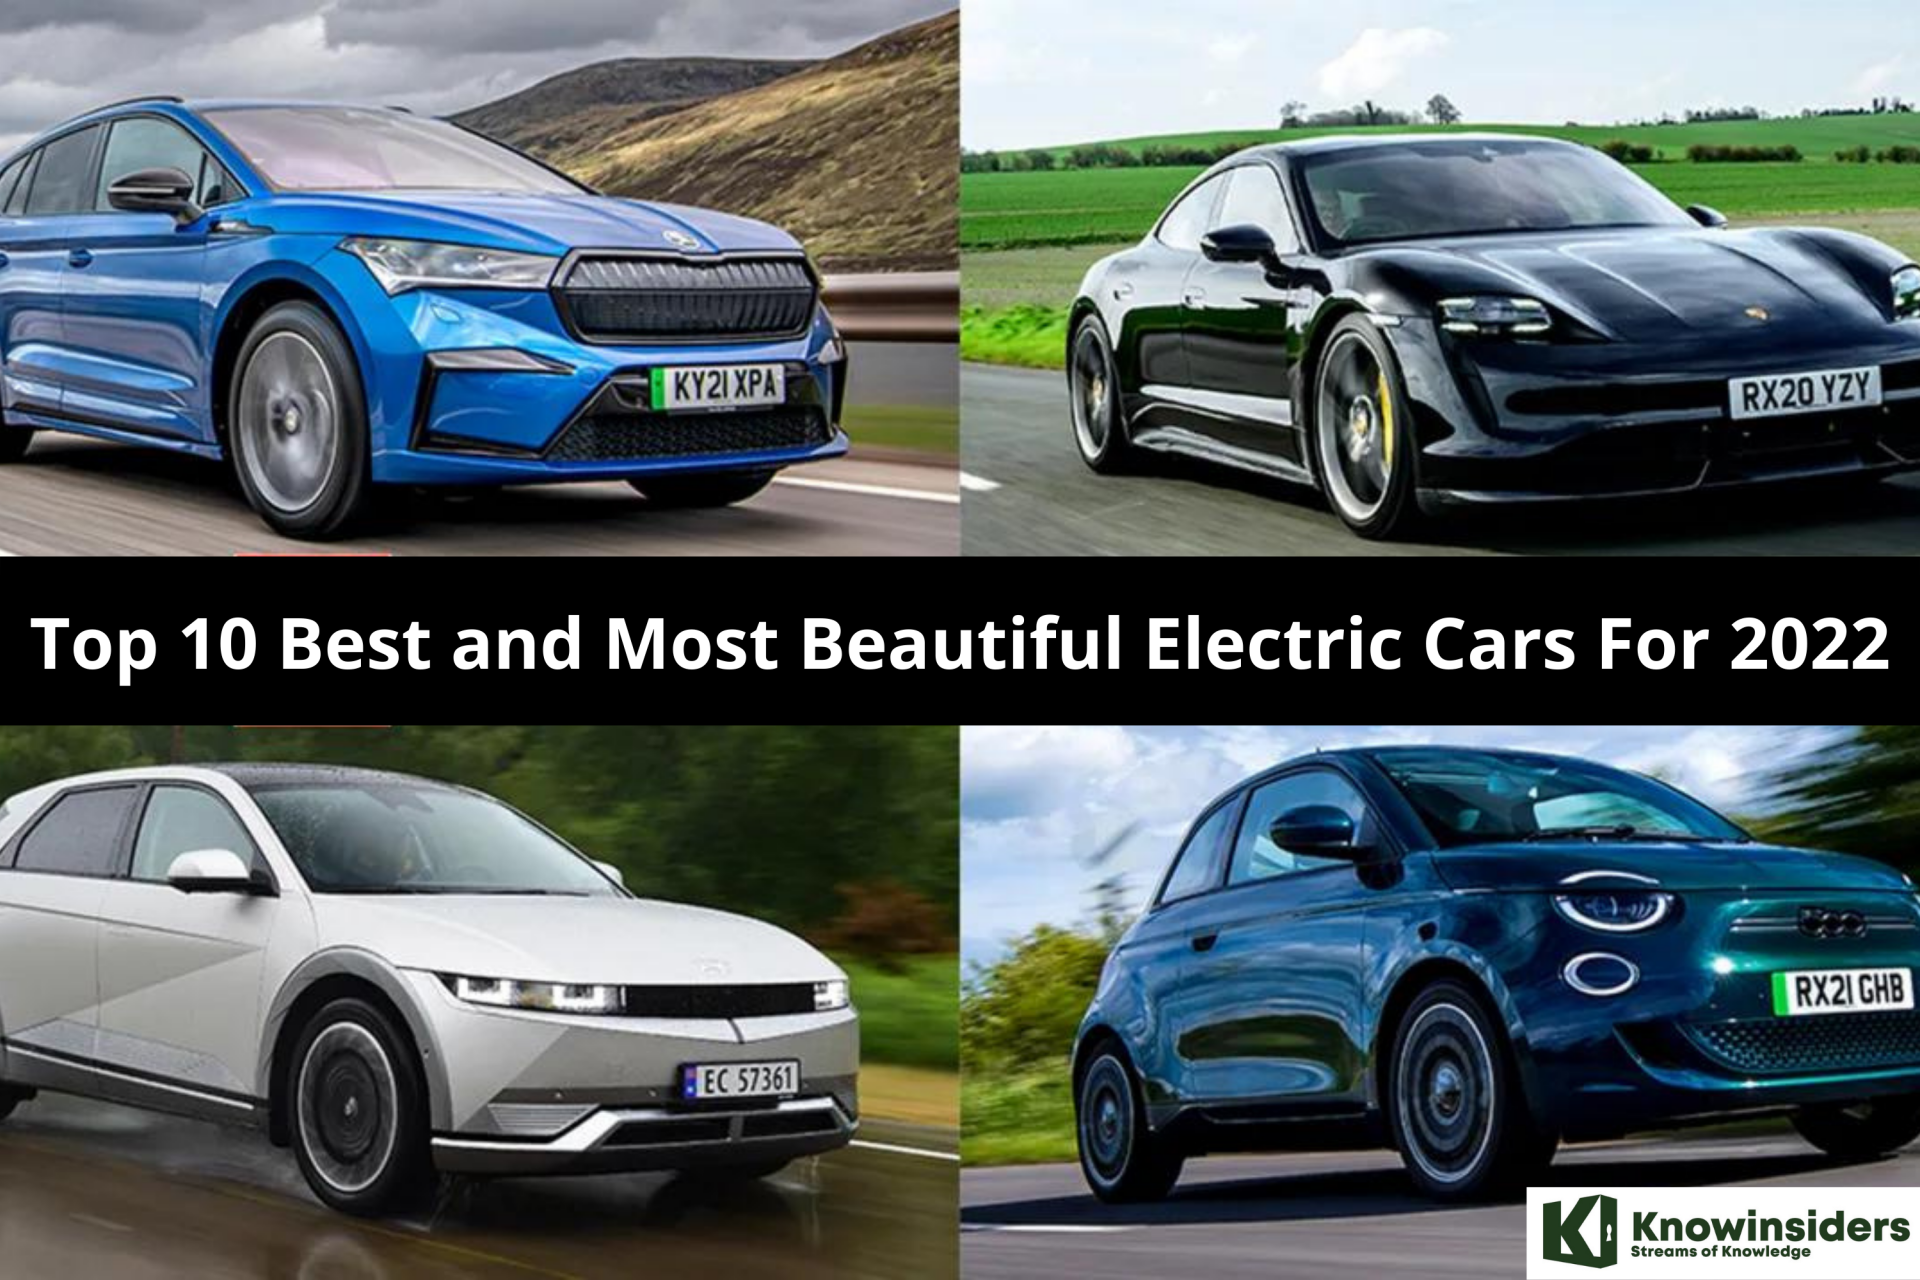 Top 10 Best and Most Beautiful Electric Cars 2022